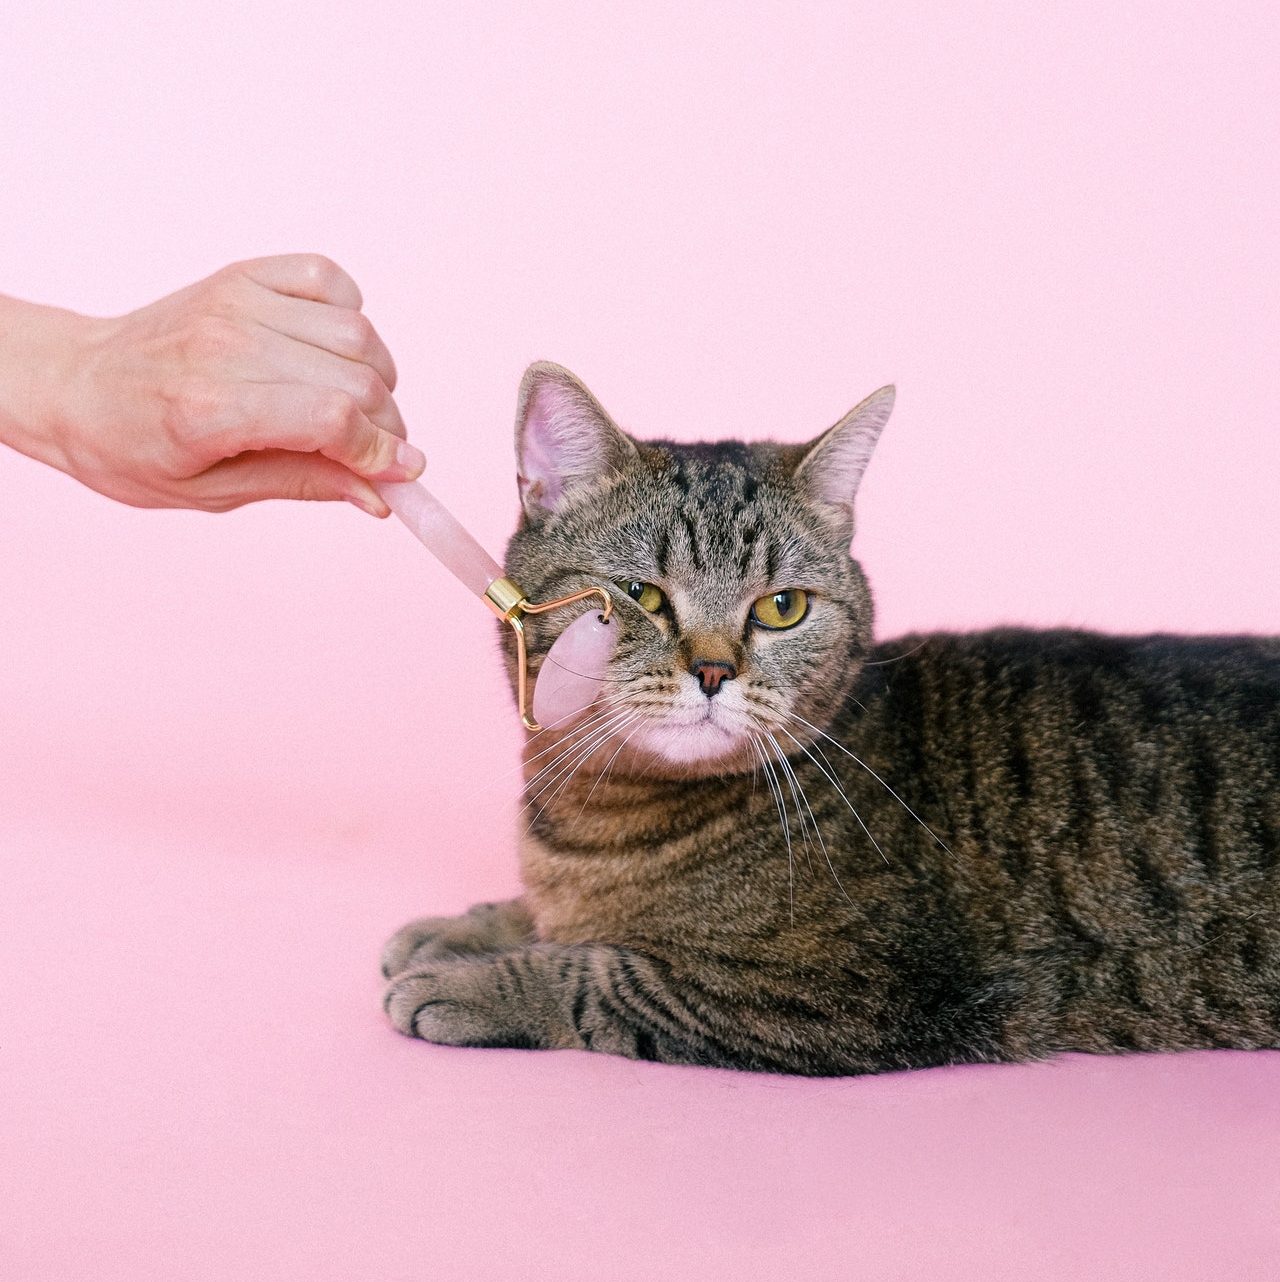 Cat sitting in front of a pink background, while a human's hand holds a pink facial roller up to the cat's face